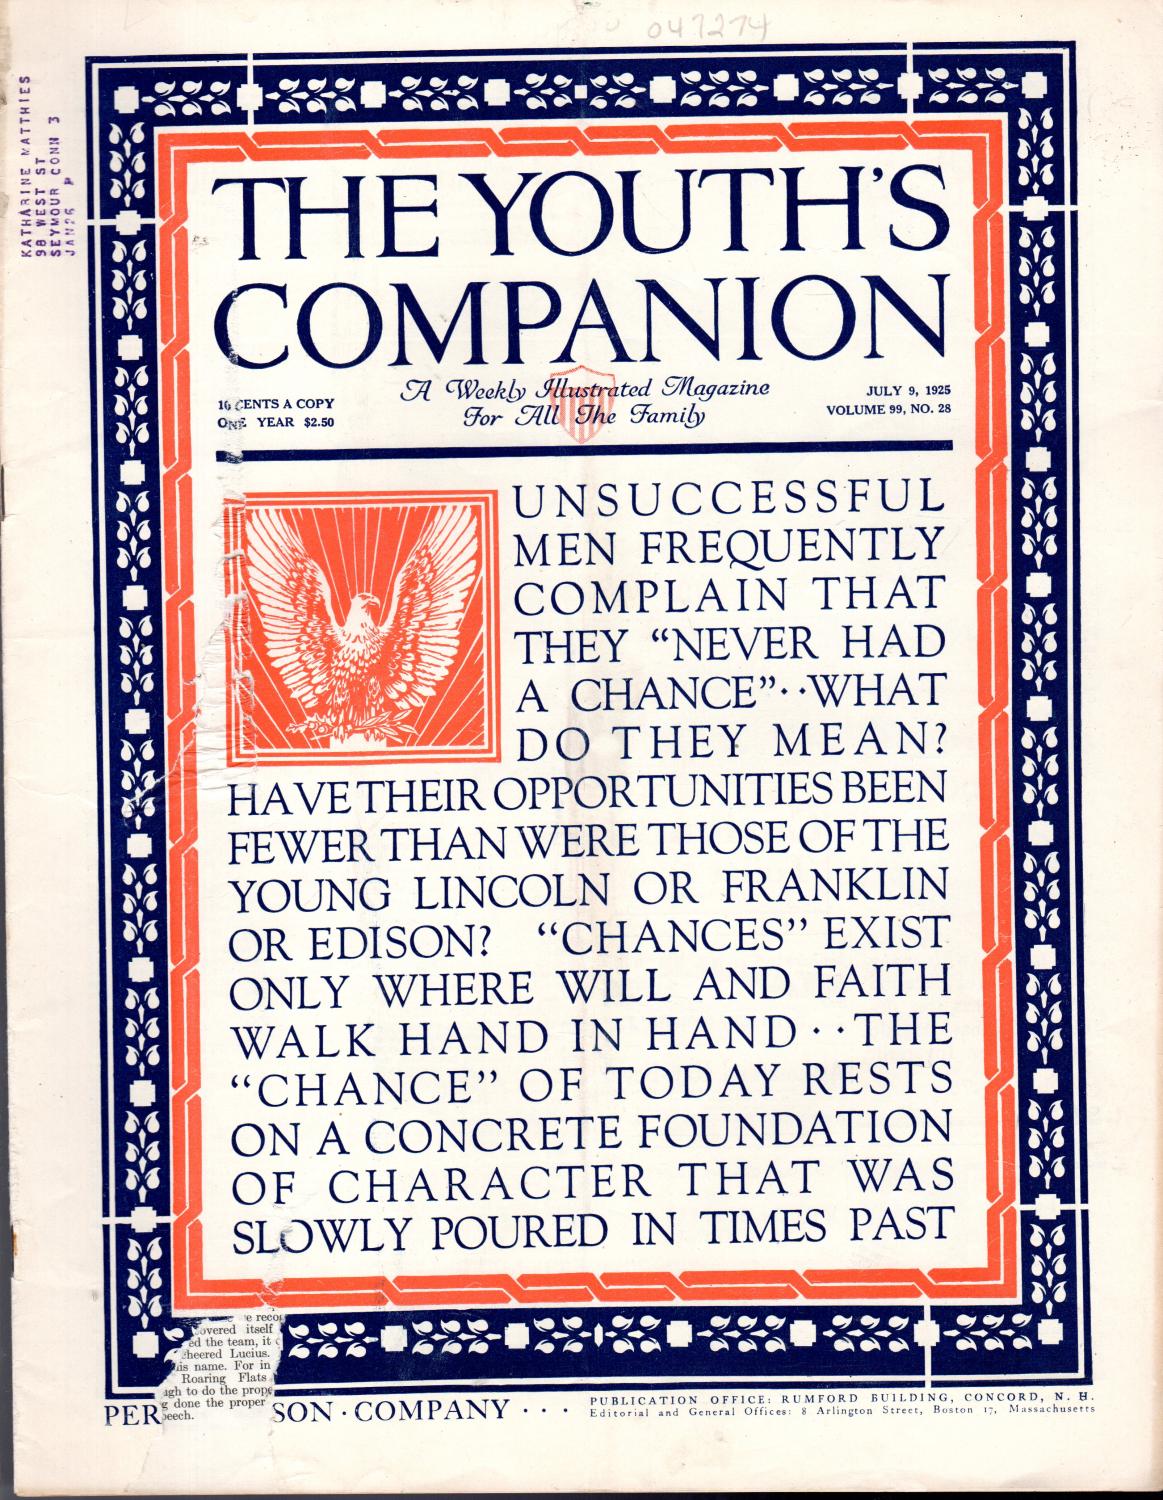 The Youth's Companion: Volume 99, No. 28: July 9, 1925 by Unknown) Perry  Mason Company: (1925) 1st. Magazine / Periodical